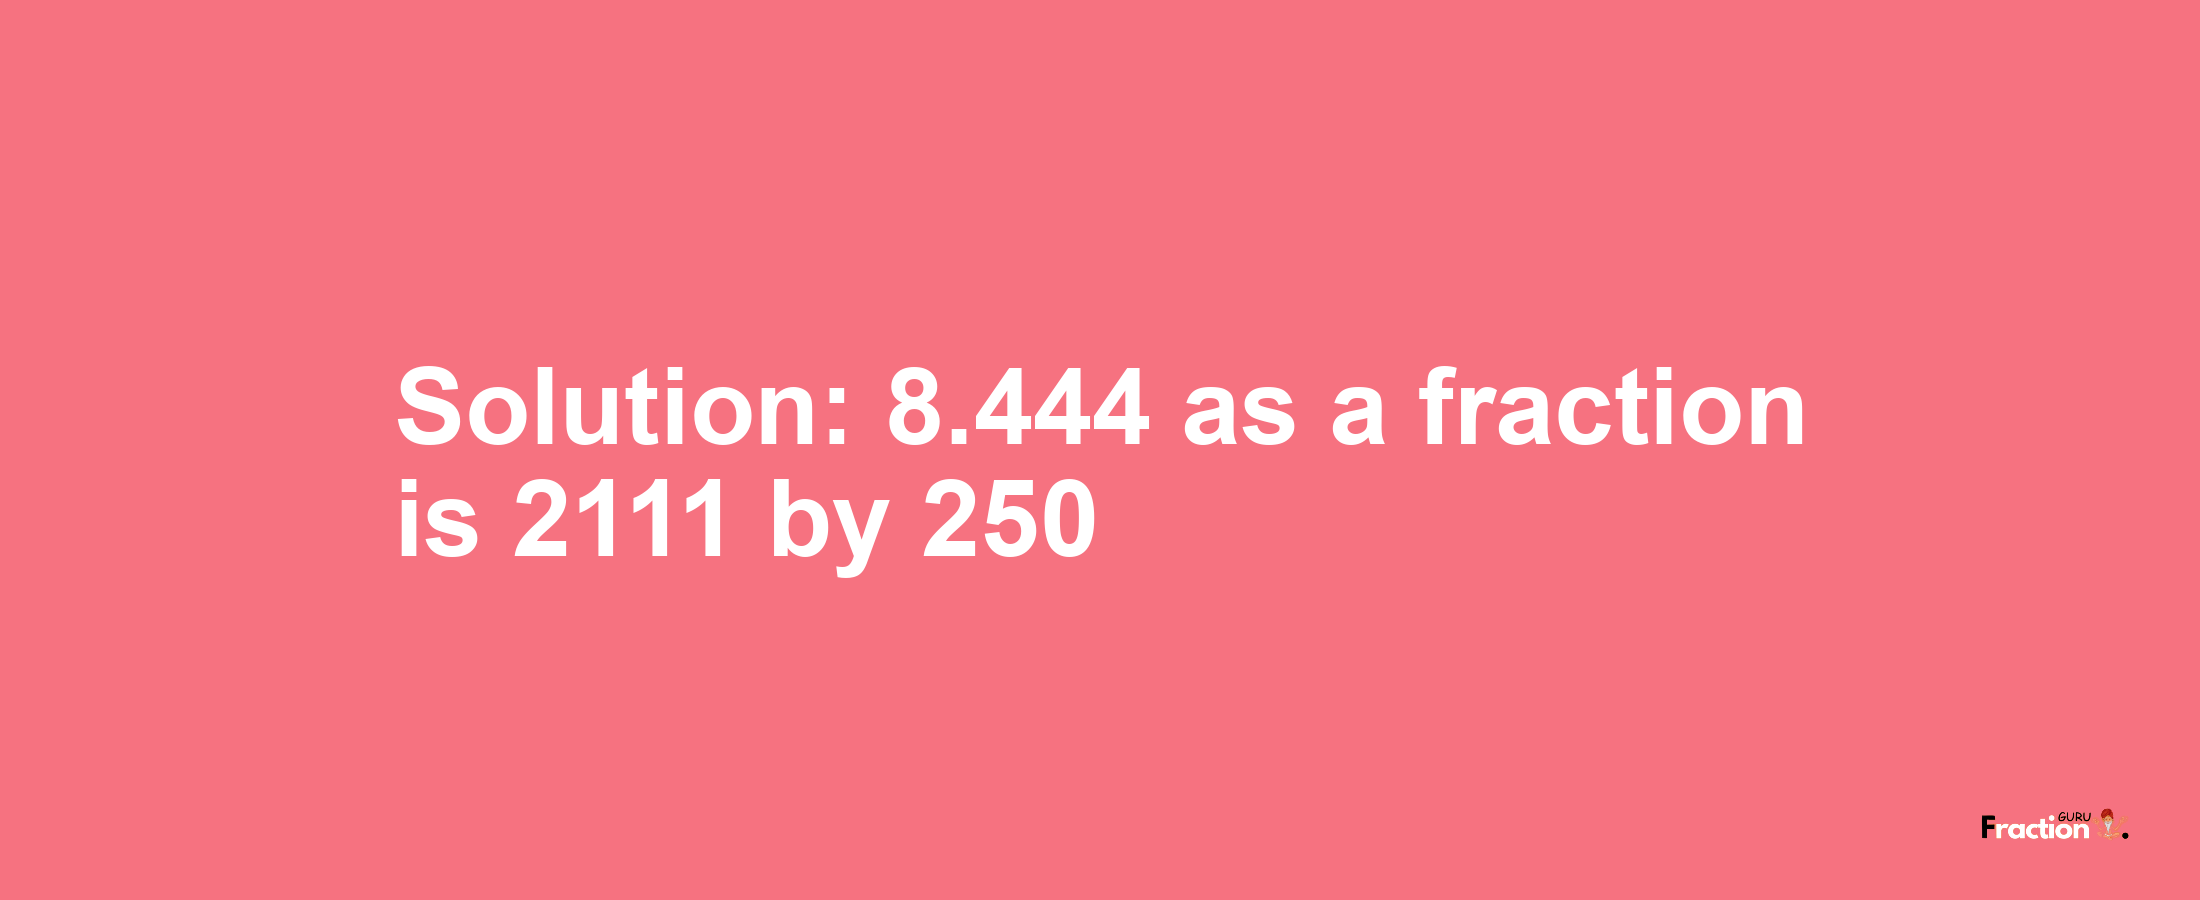 Solution:8.444 as a fraction is 2111/250